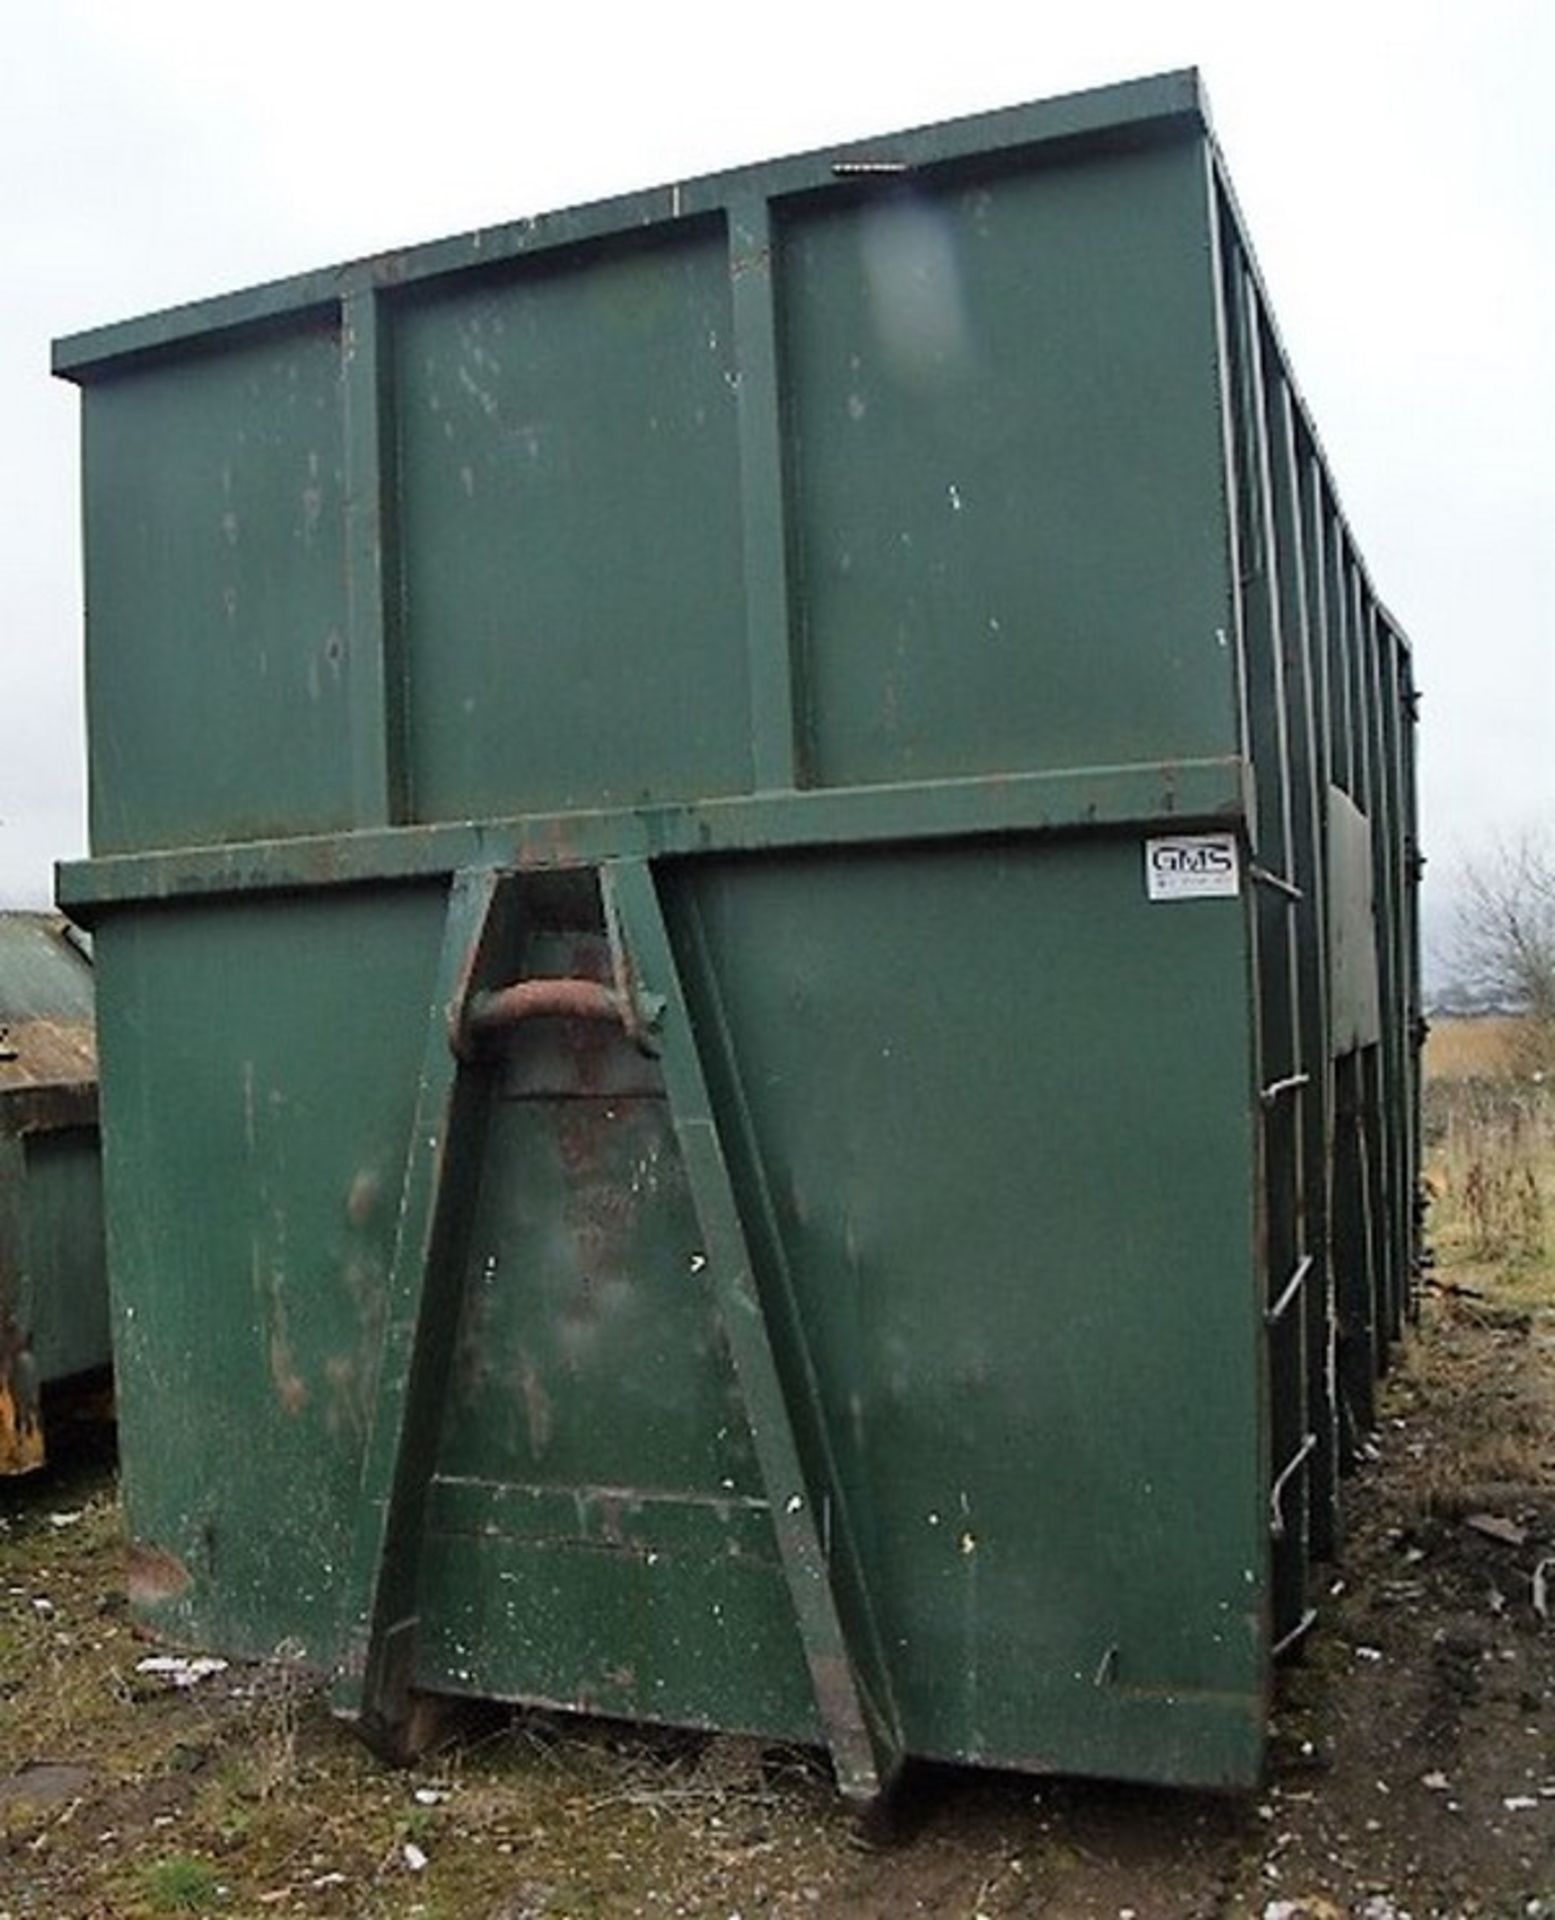 EXTRA HIGH OPEN TOP SKIP. C/W ACCESS LADDER. SOLD FROM ERROL AUCTION SITE. VIEWING AND UPLIFT FROM L